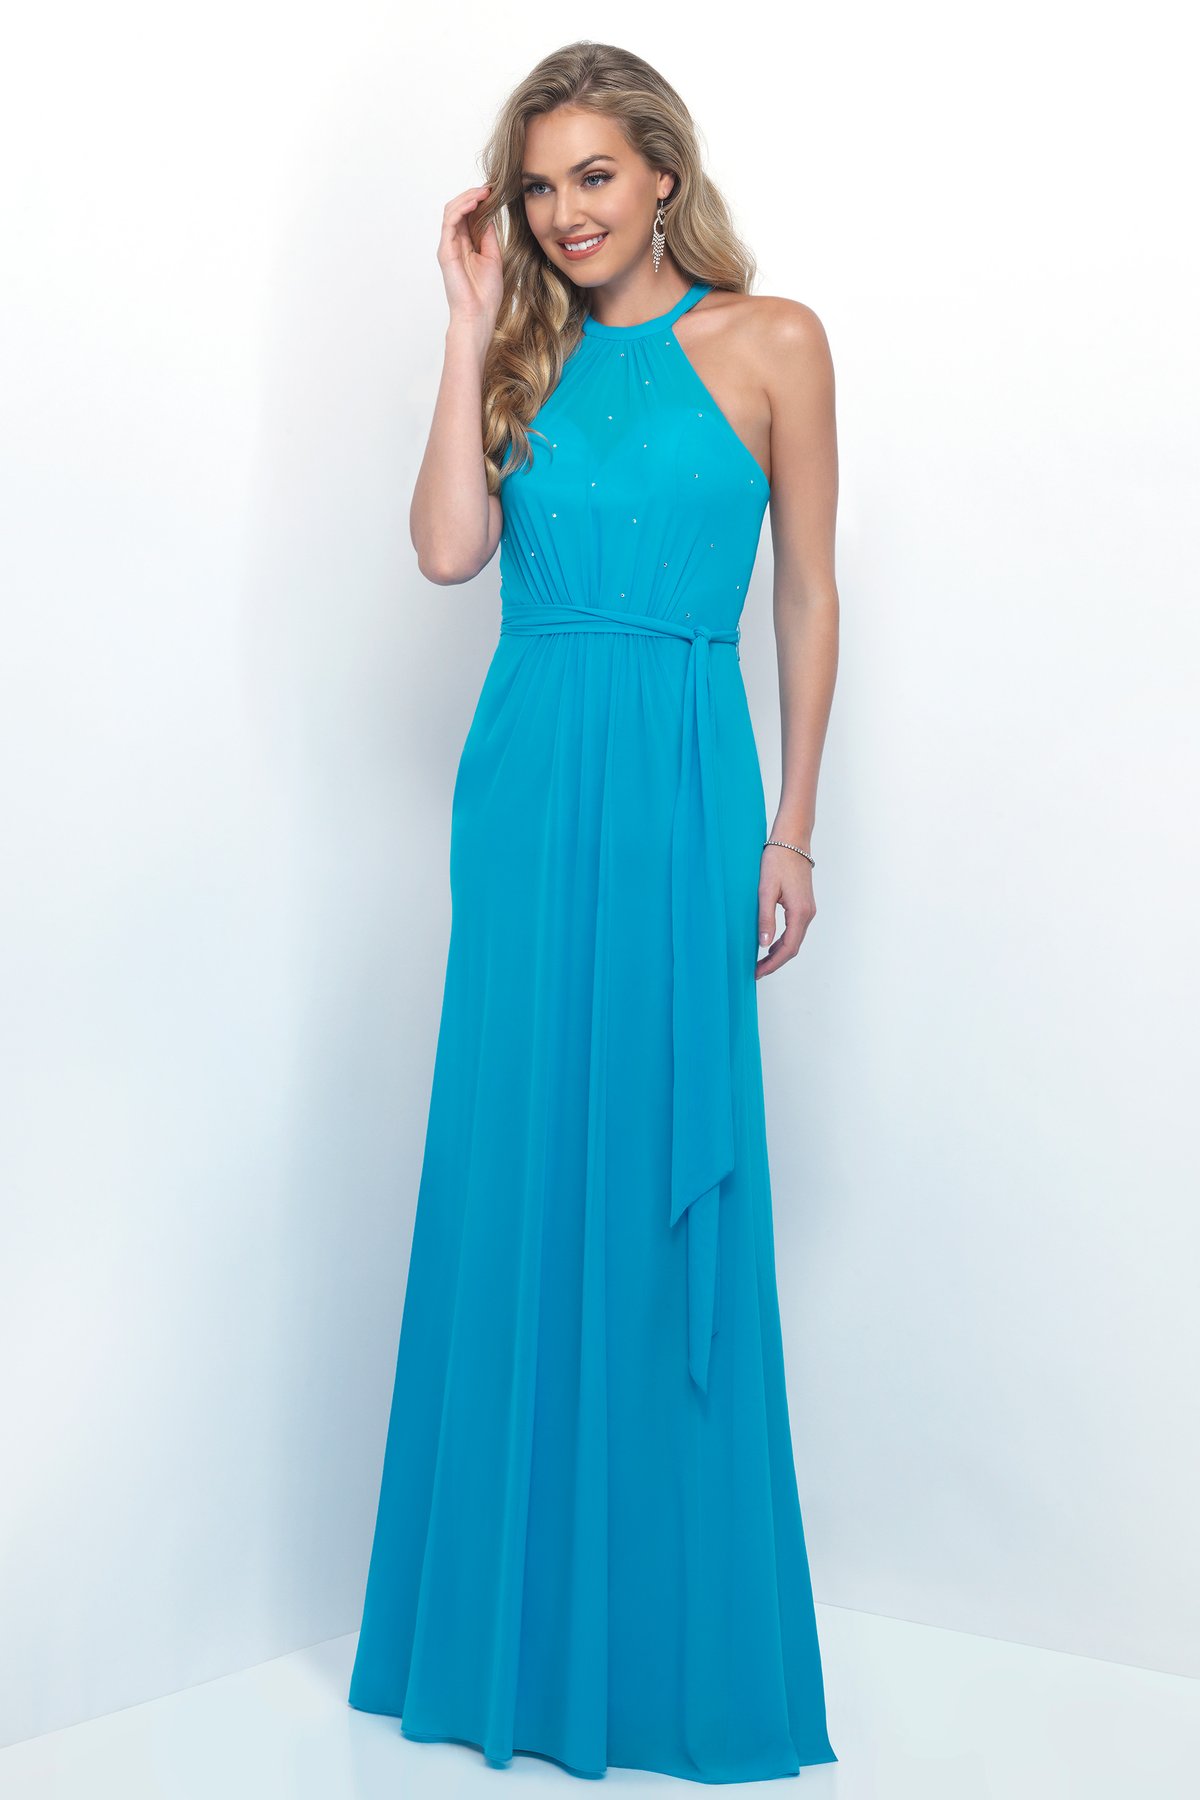 Style 4262 Bridesmaid Dress by Alexia Designs